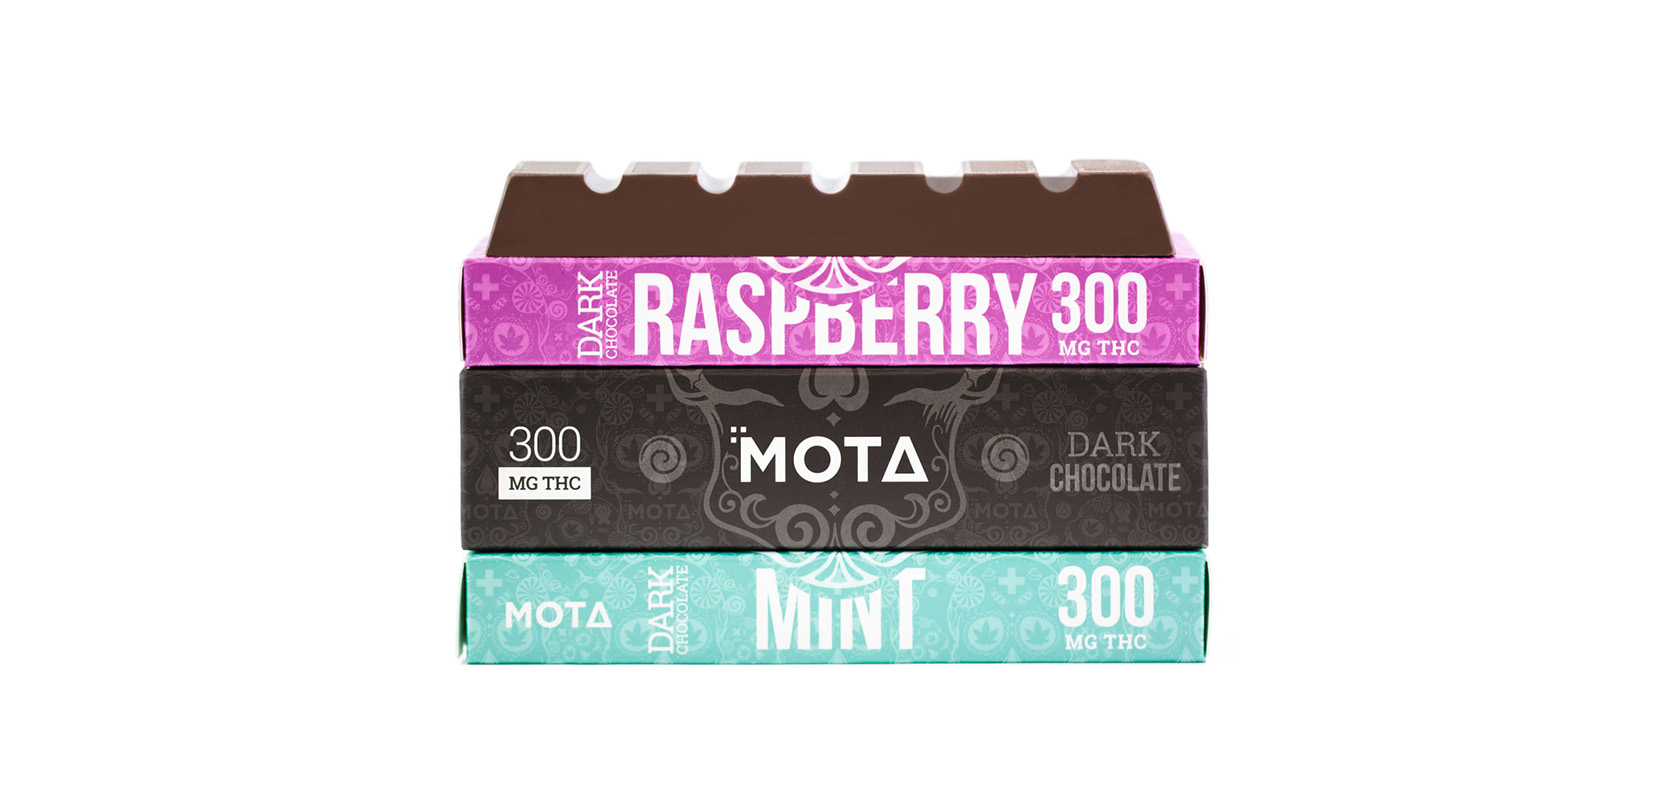 MOTA weed edibles Dark Weed Chocolate Bar. buy edibles from dispensary for weed online Canada.